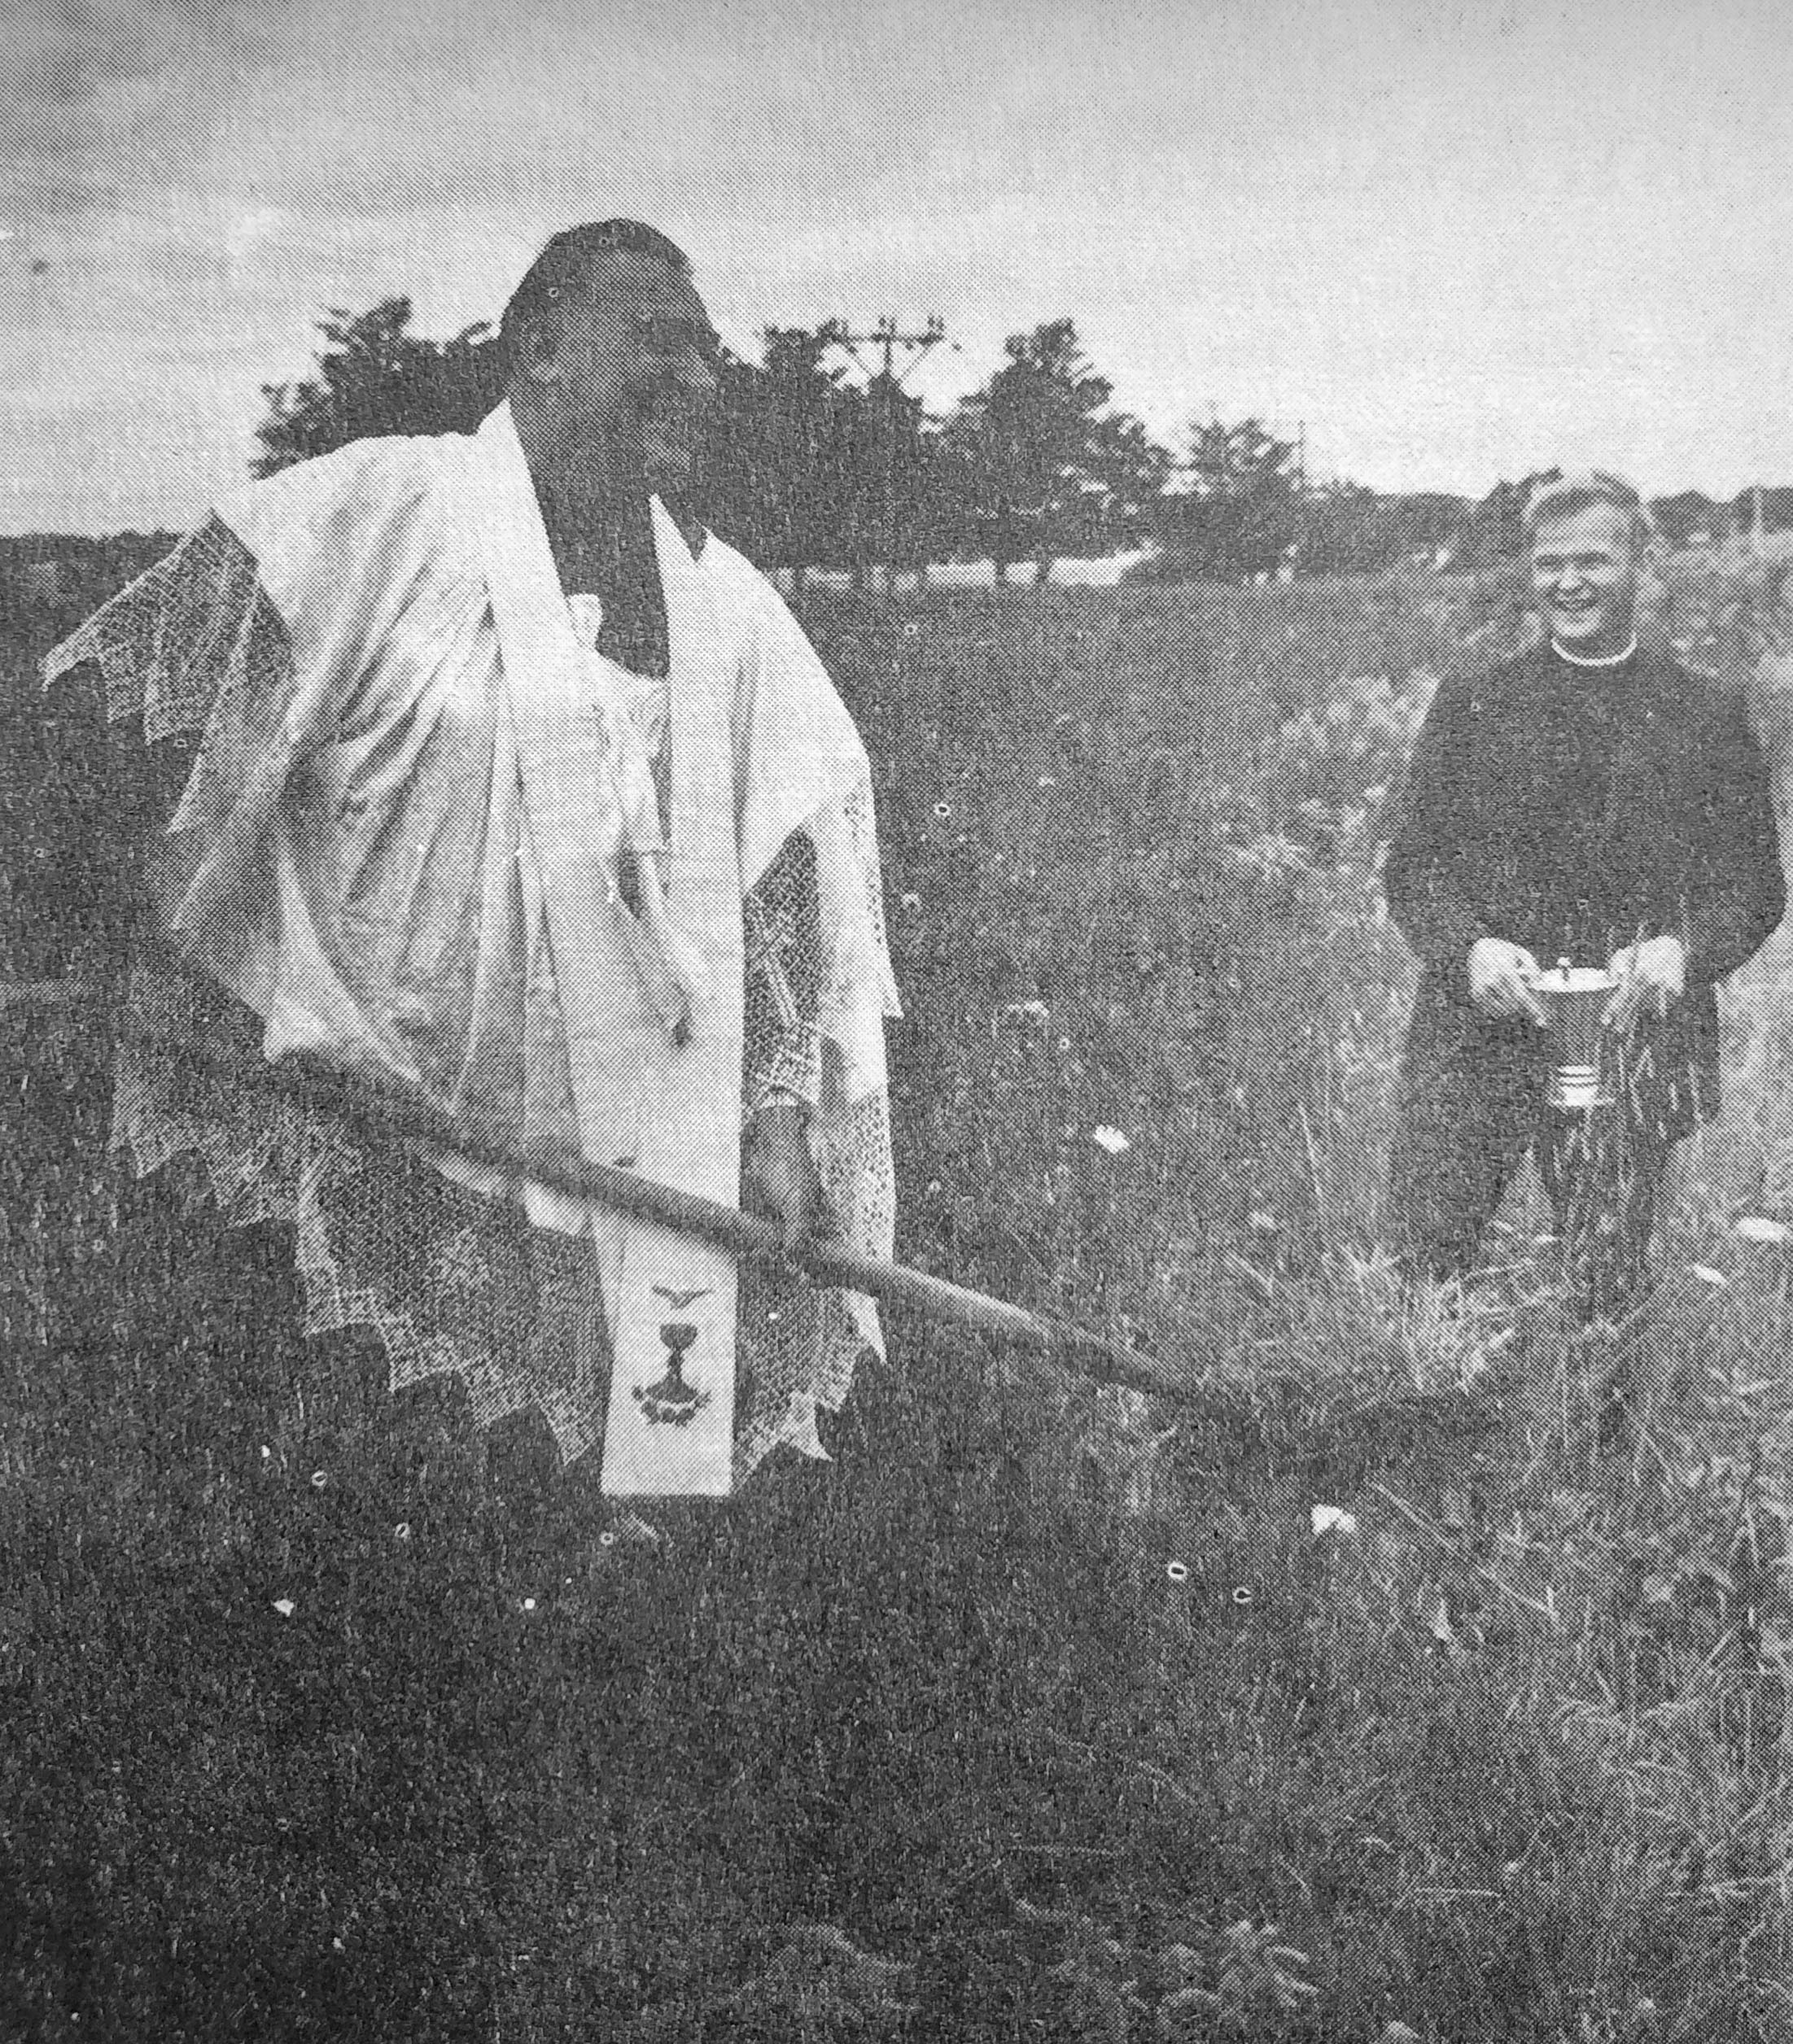 Photo of Fr. Mahoney with a shovel before construction